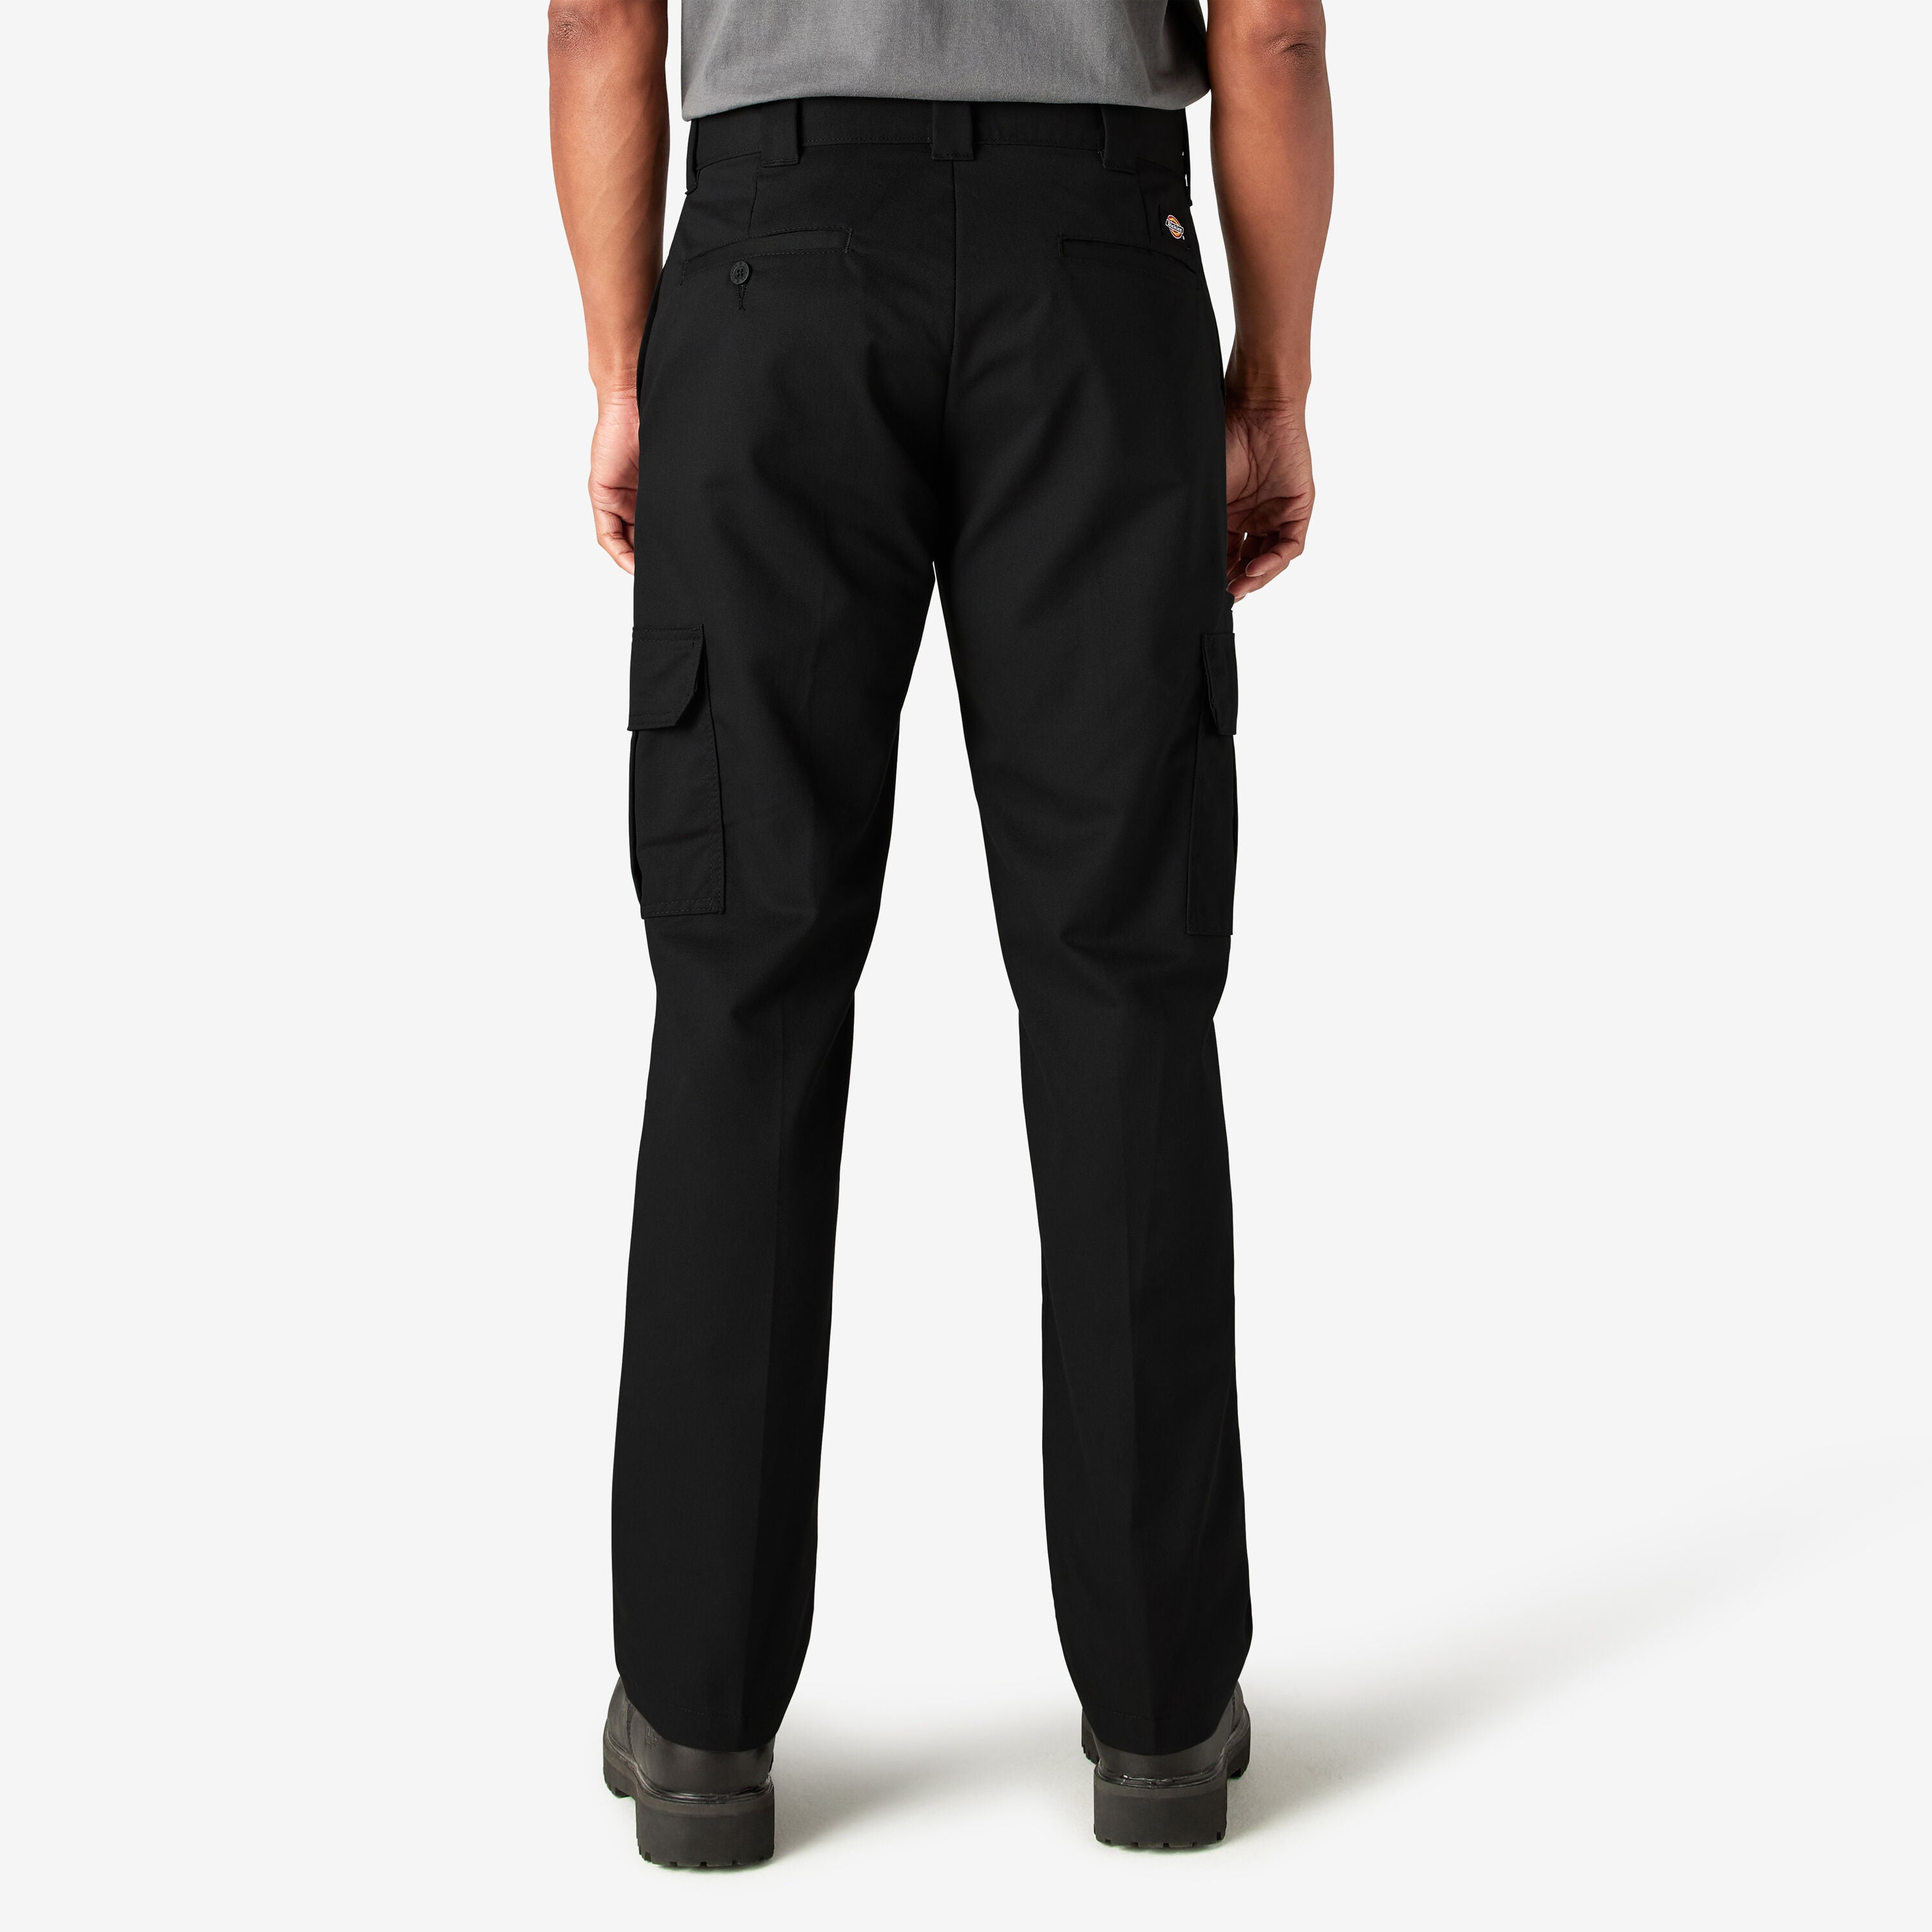 Dickies Men's Classic Fit Mid-Rise Duck Cargo Pants at Tractor Supply Co.